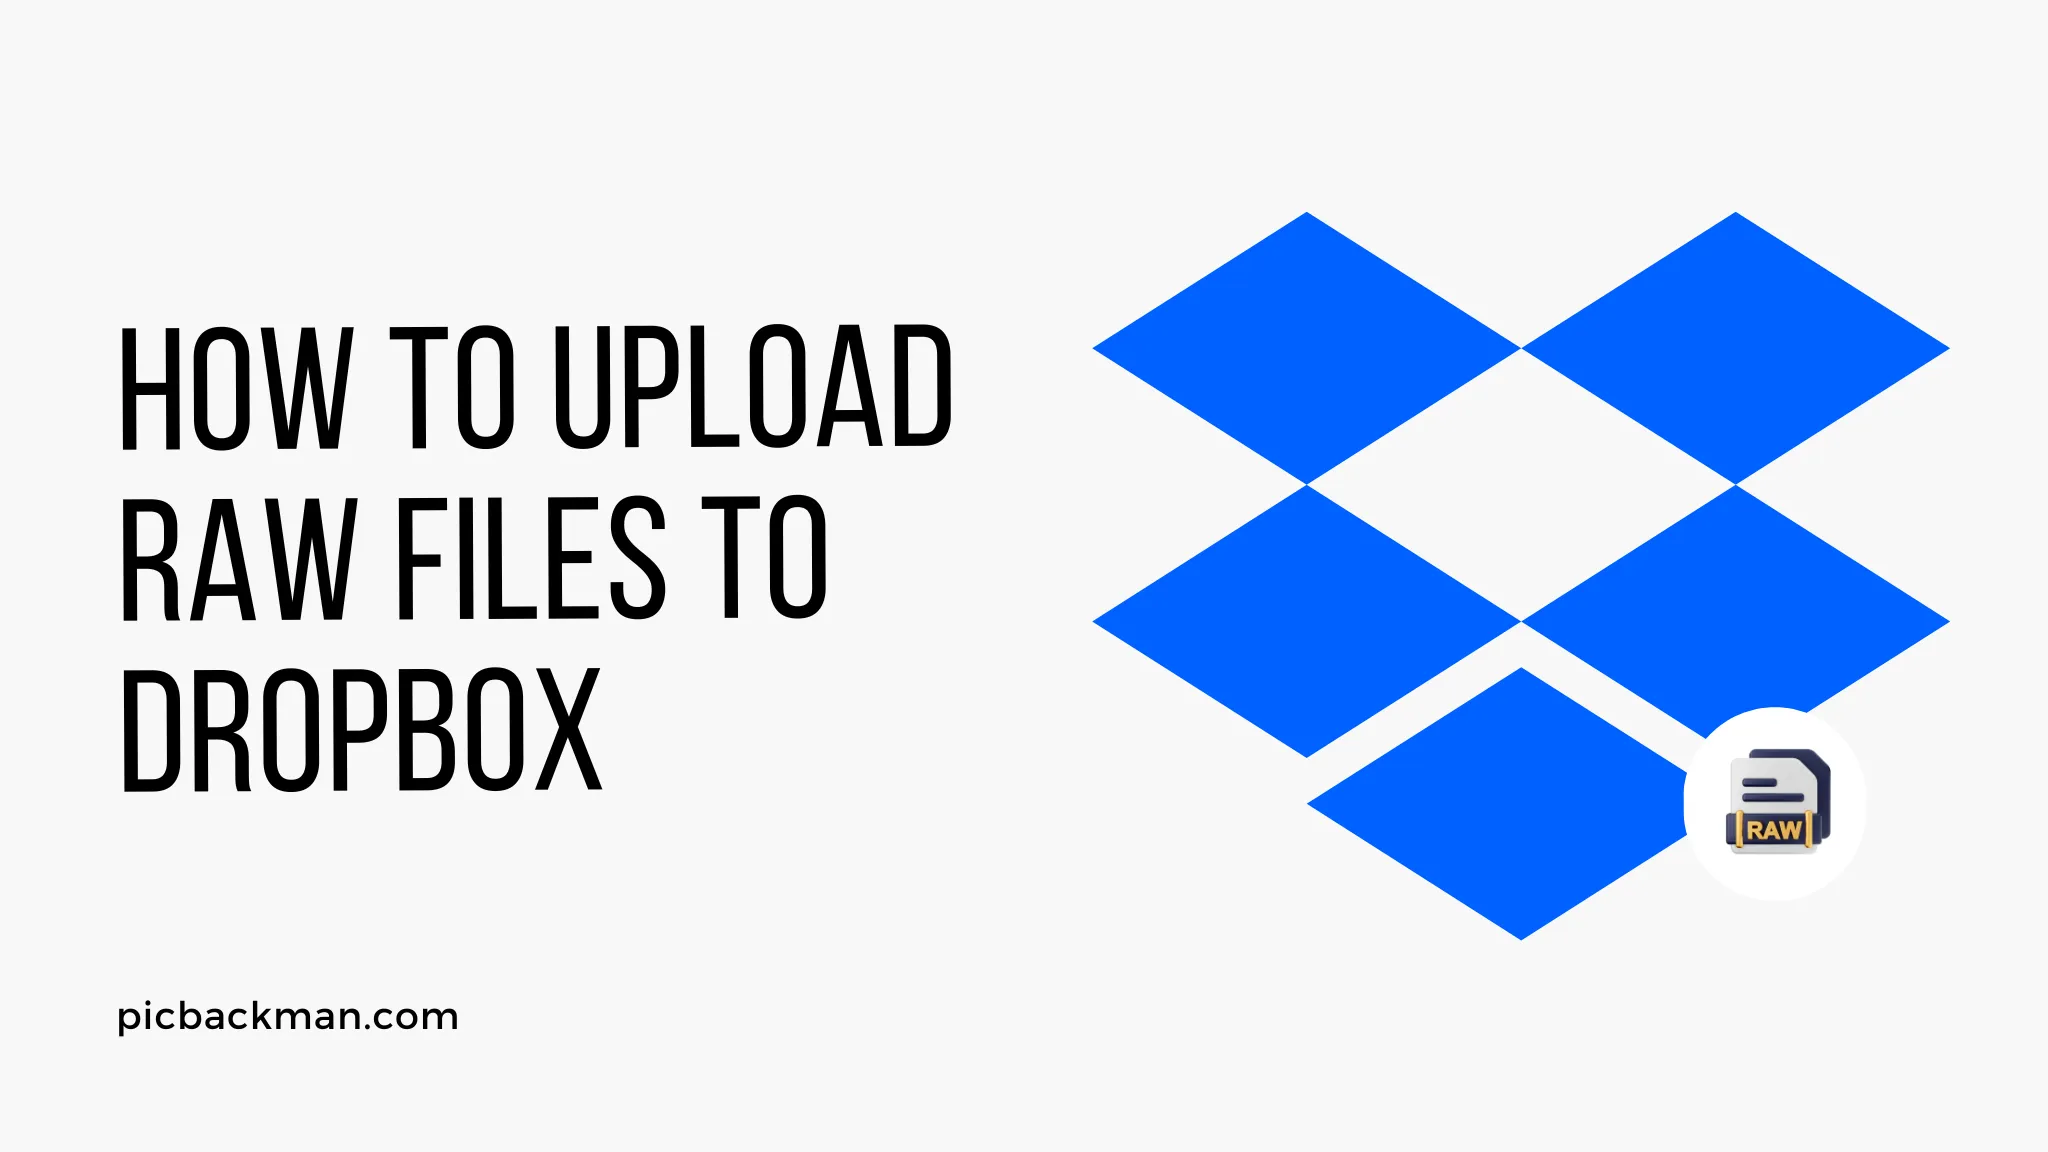 How to Upload Raw Files to Dropbox?